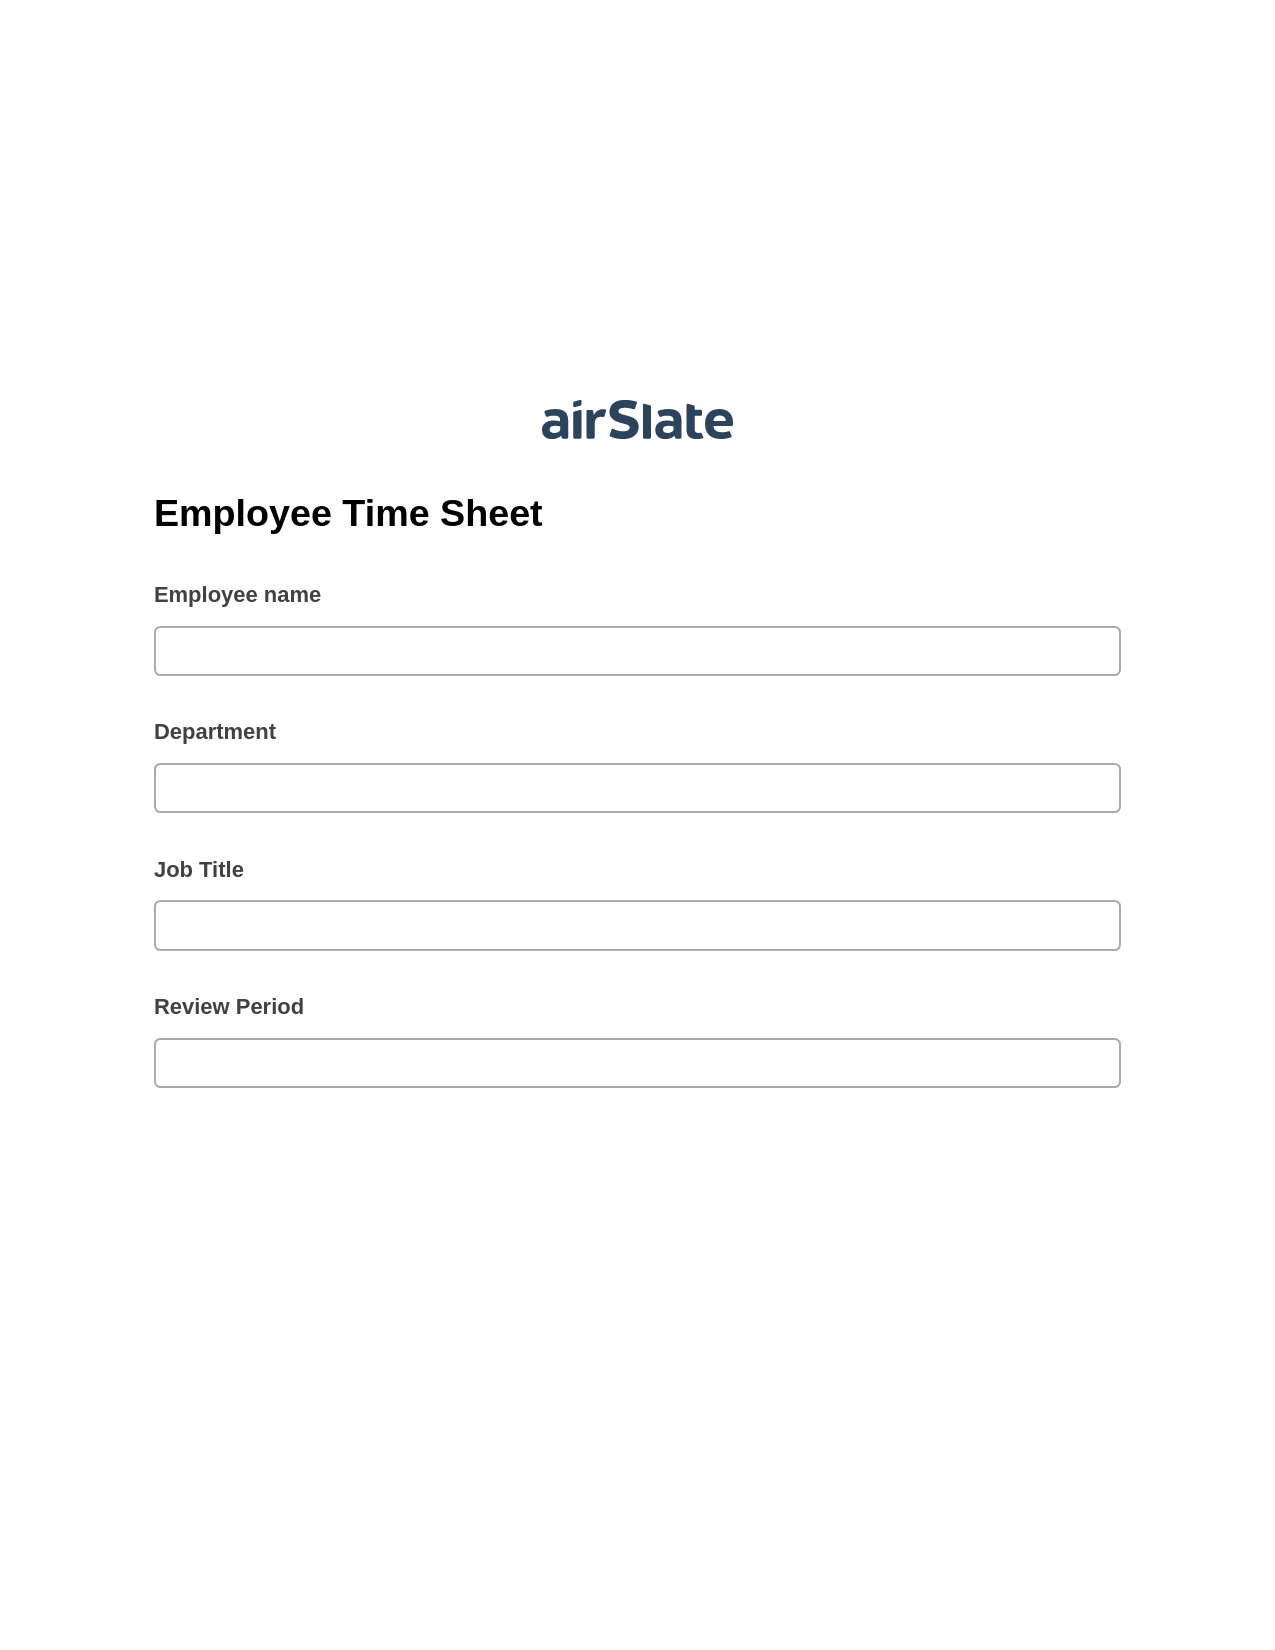 Employee Time Sheet Pre-fill Document Bot, Create slate addon, Email Notification Postfinish Bot